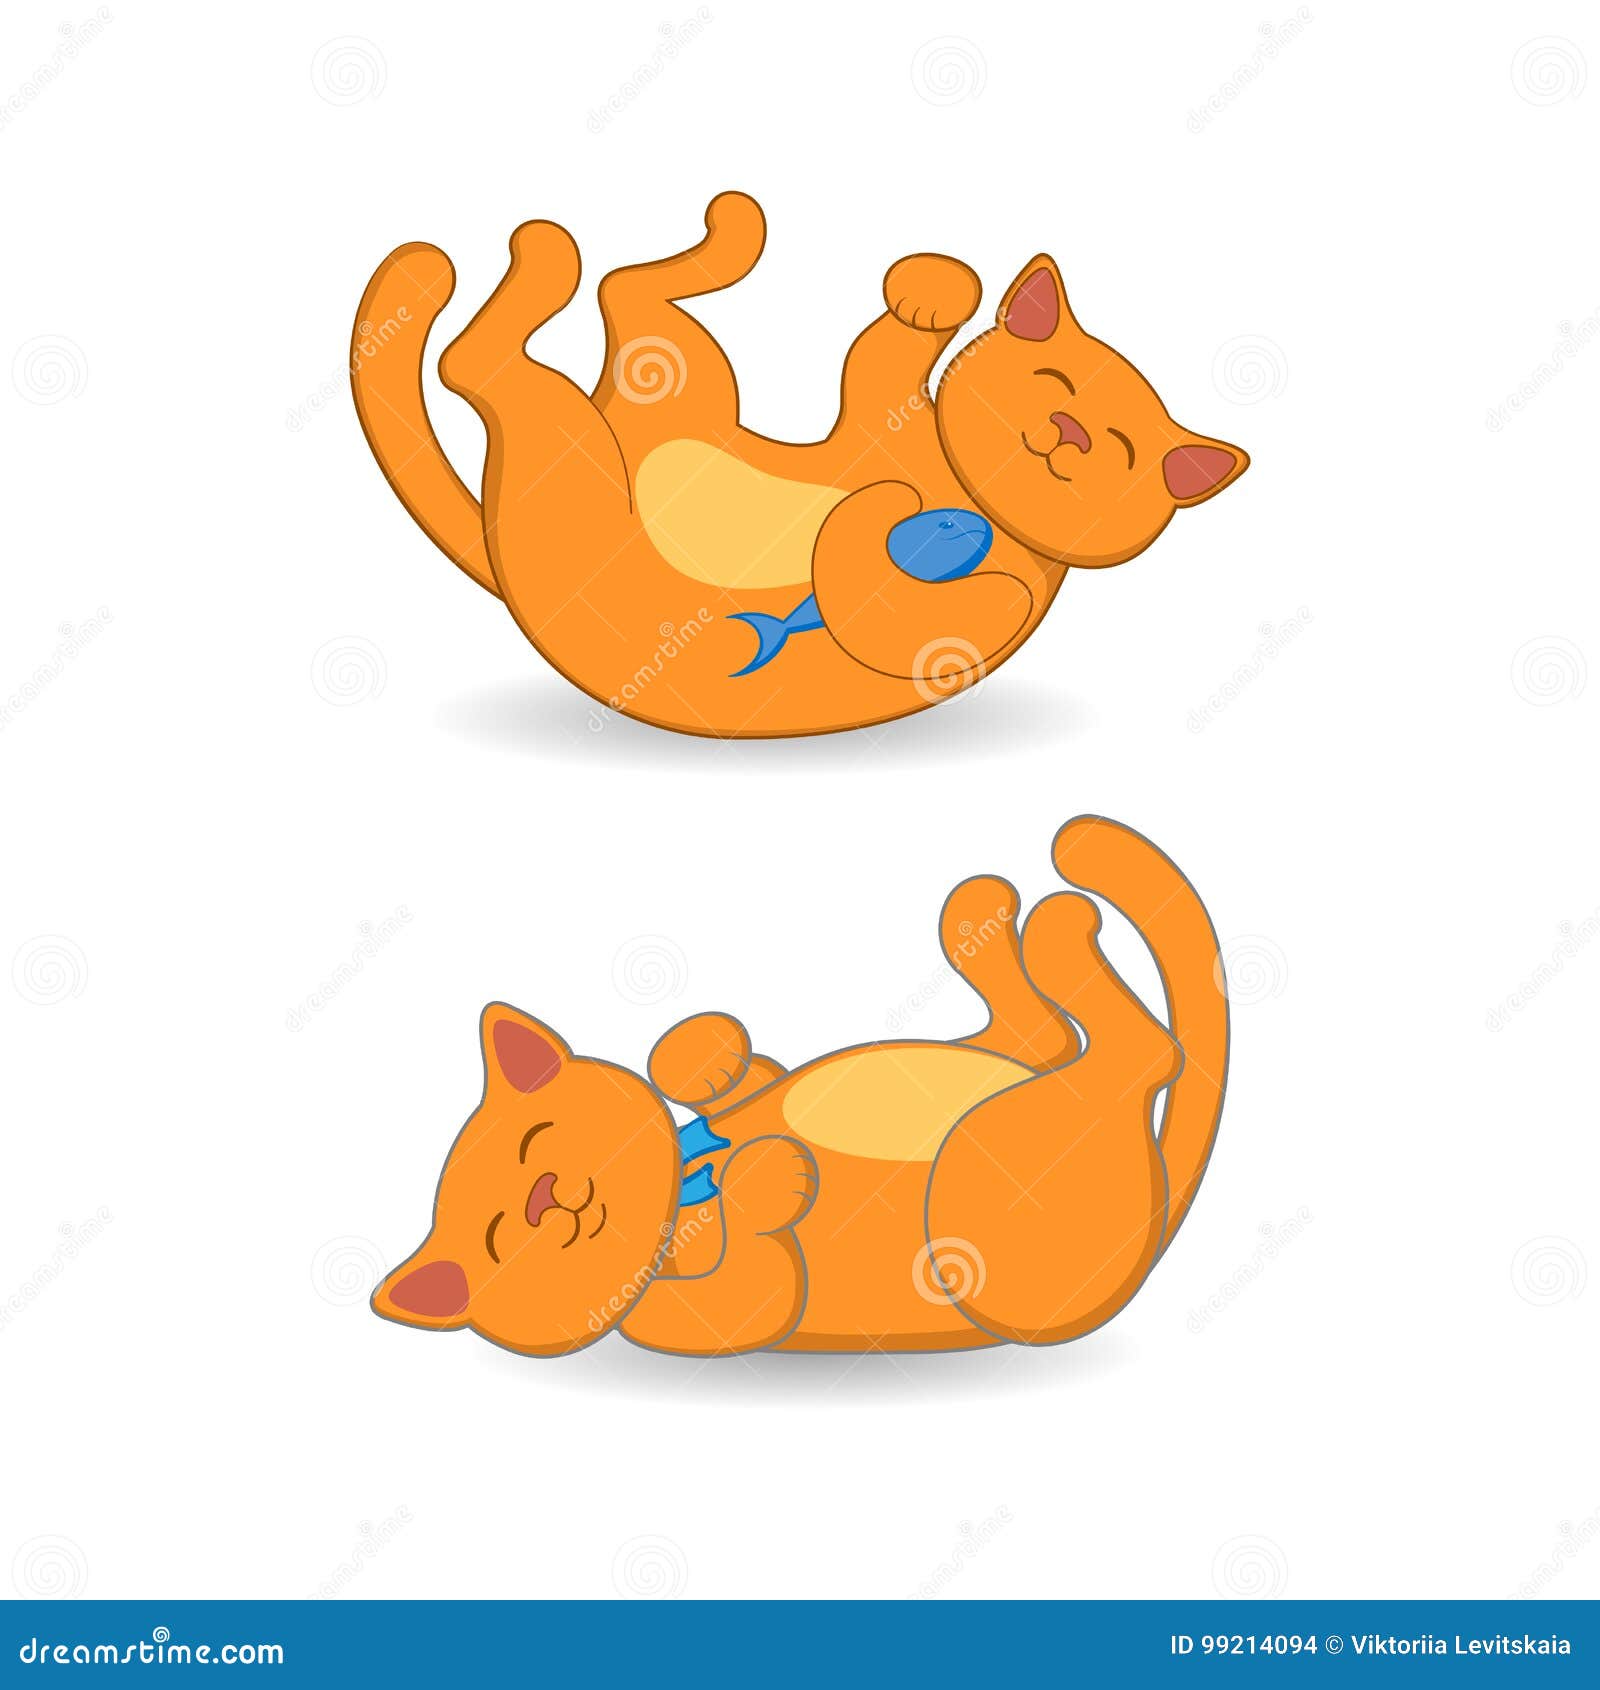 Сute vector illustration with red cat ice skating Stock Vector